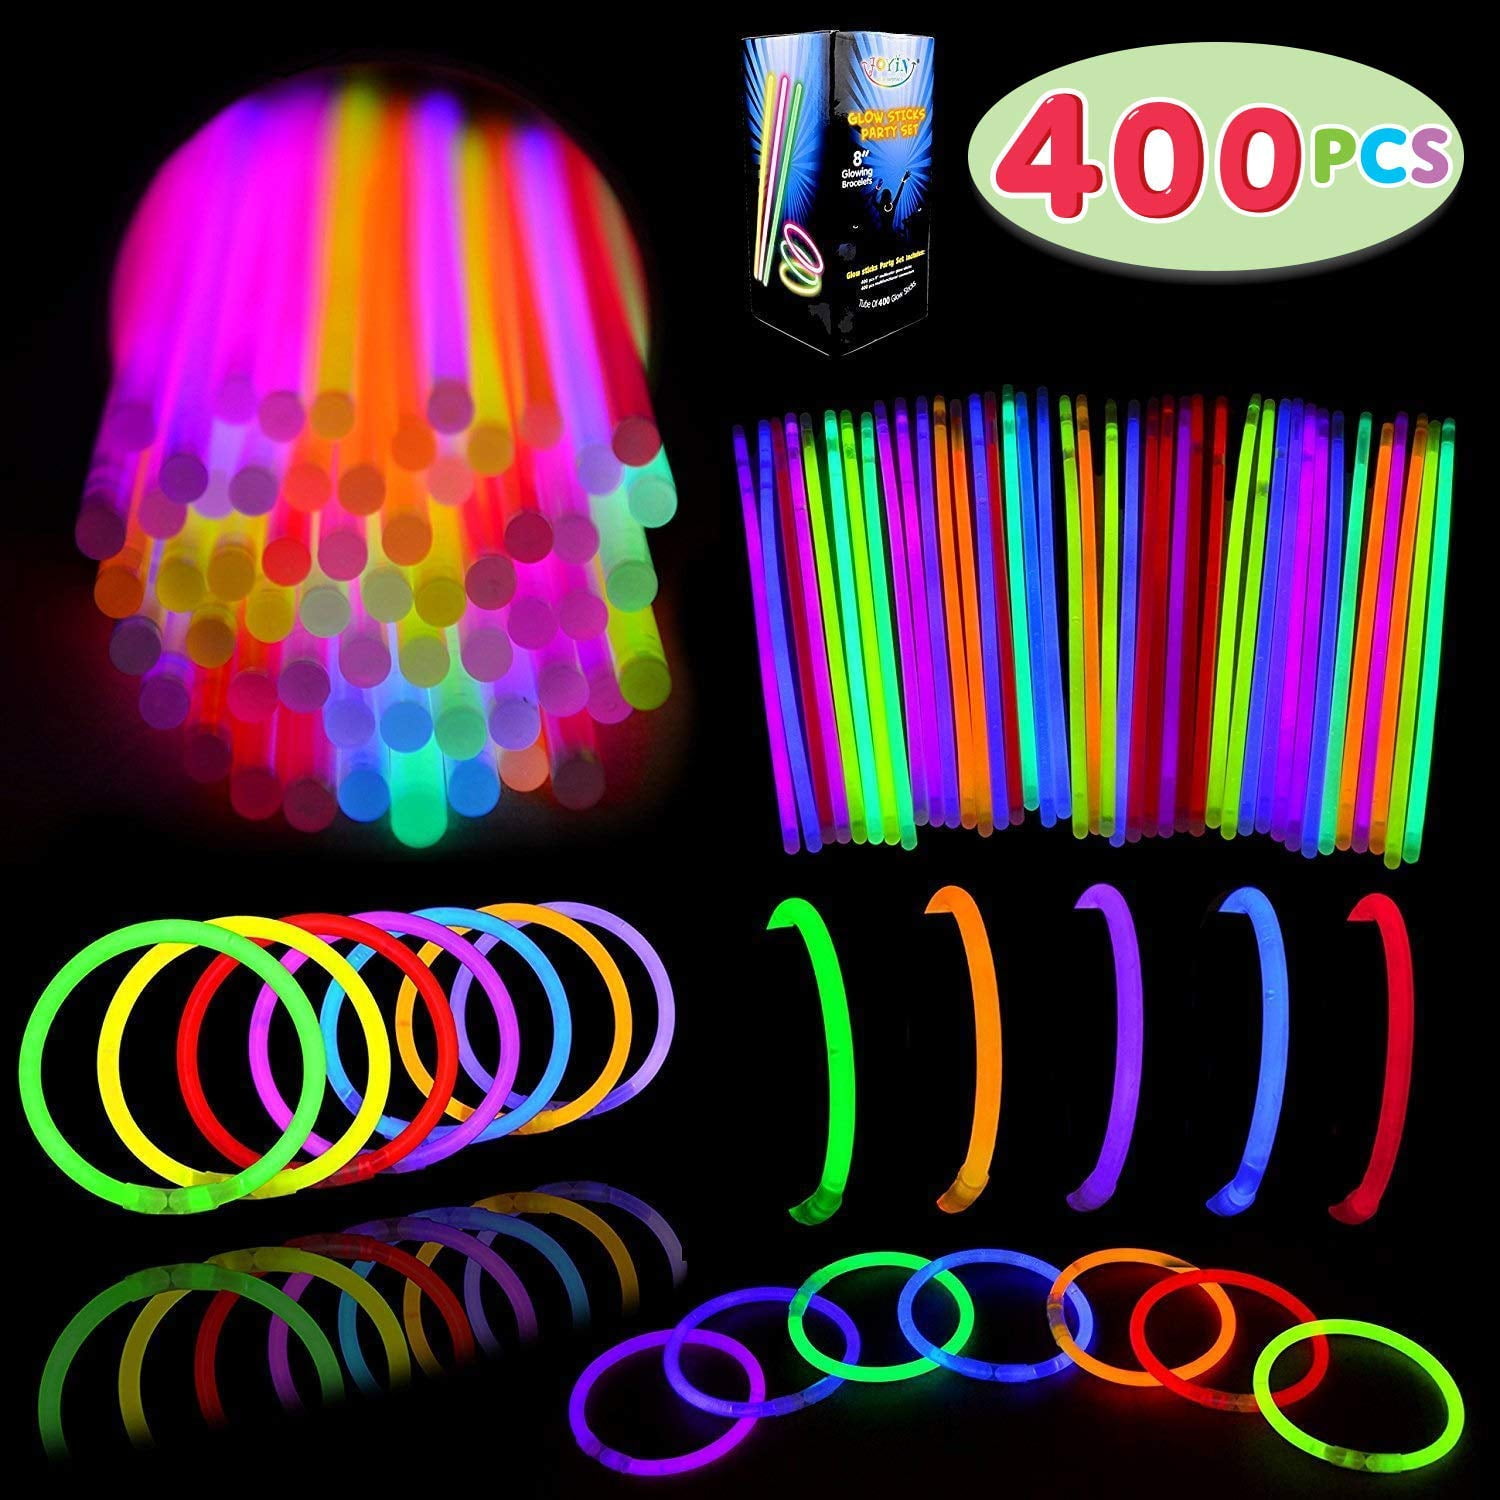 40 Count Glow Sticks Bracelets Glows In The Dark Multi Color With Connectors 8" 